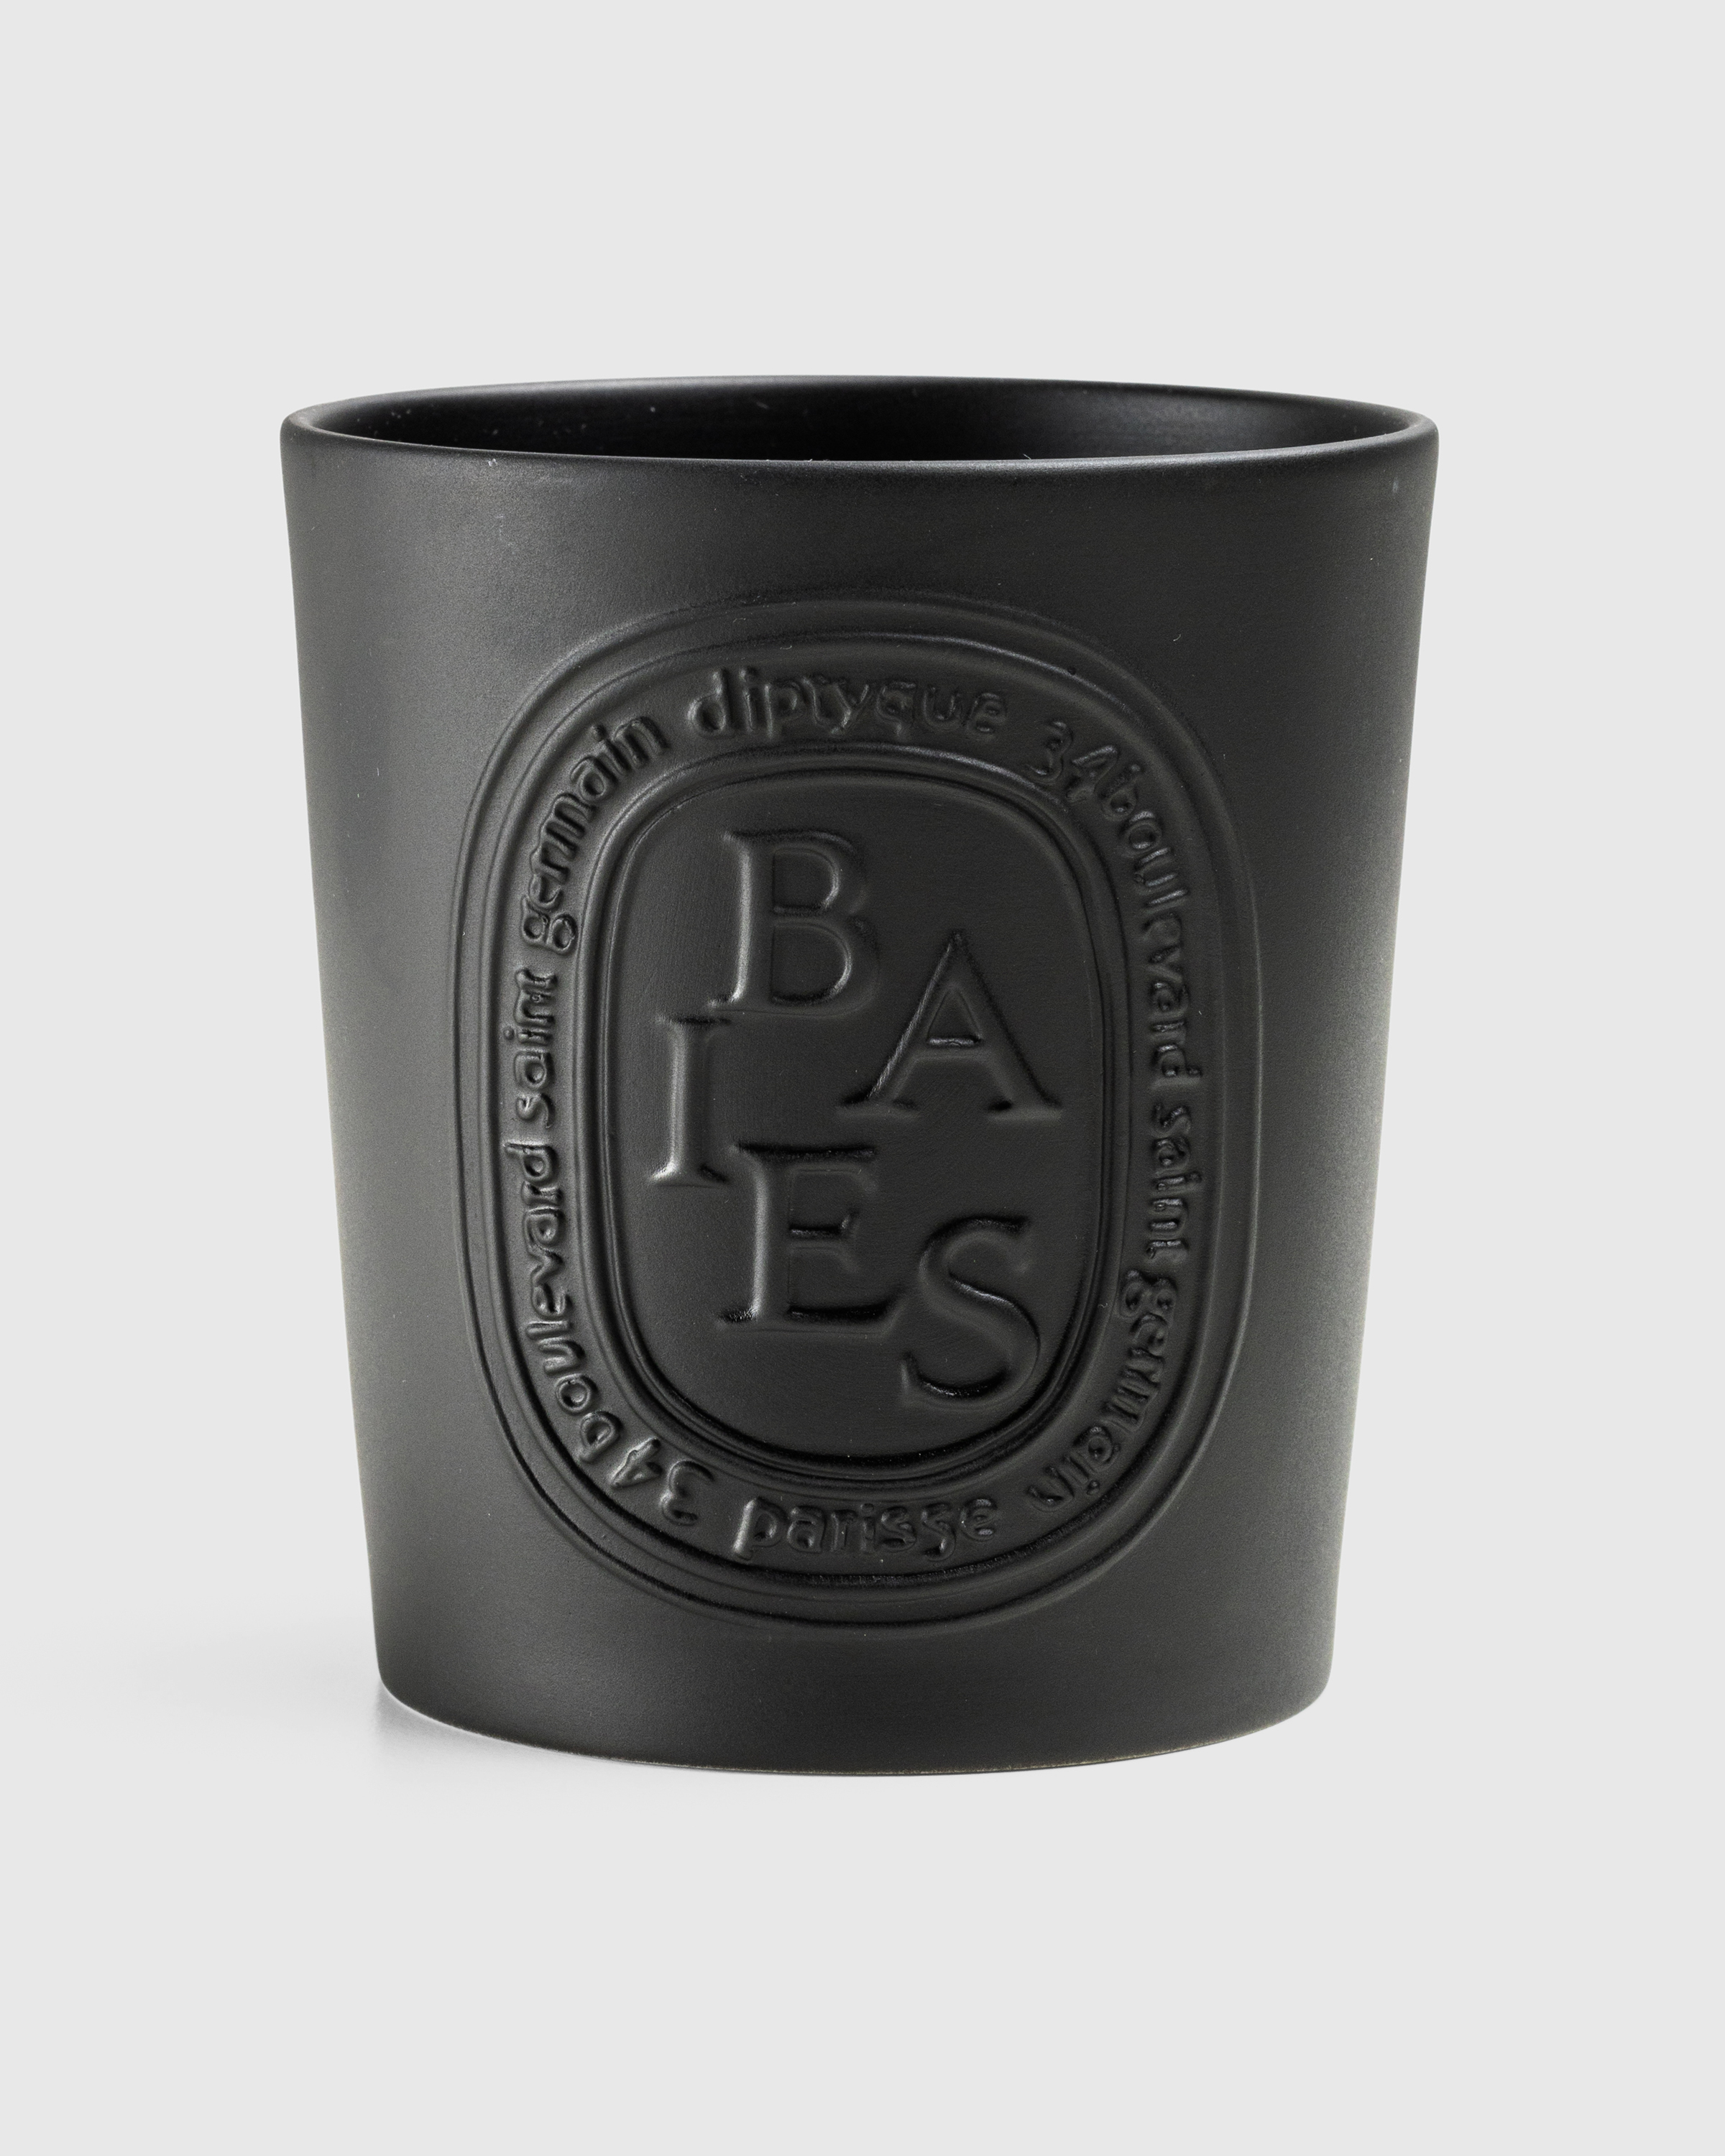 Diptyque – Candle Baies 600g - Candles & Fragrances - Black - Image 1